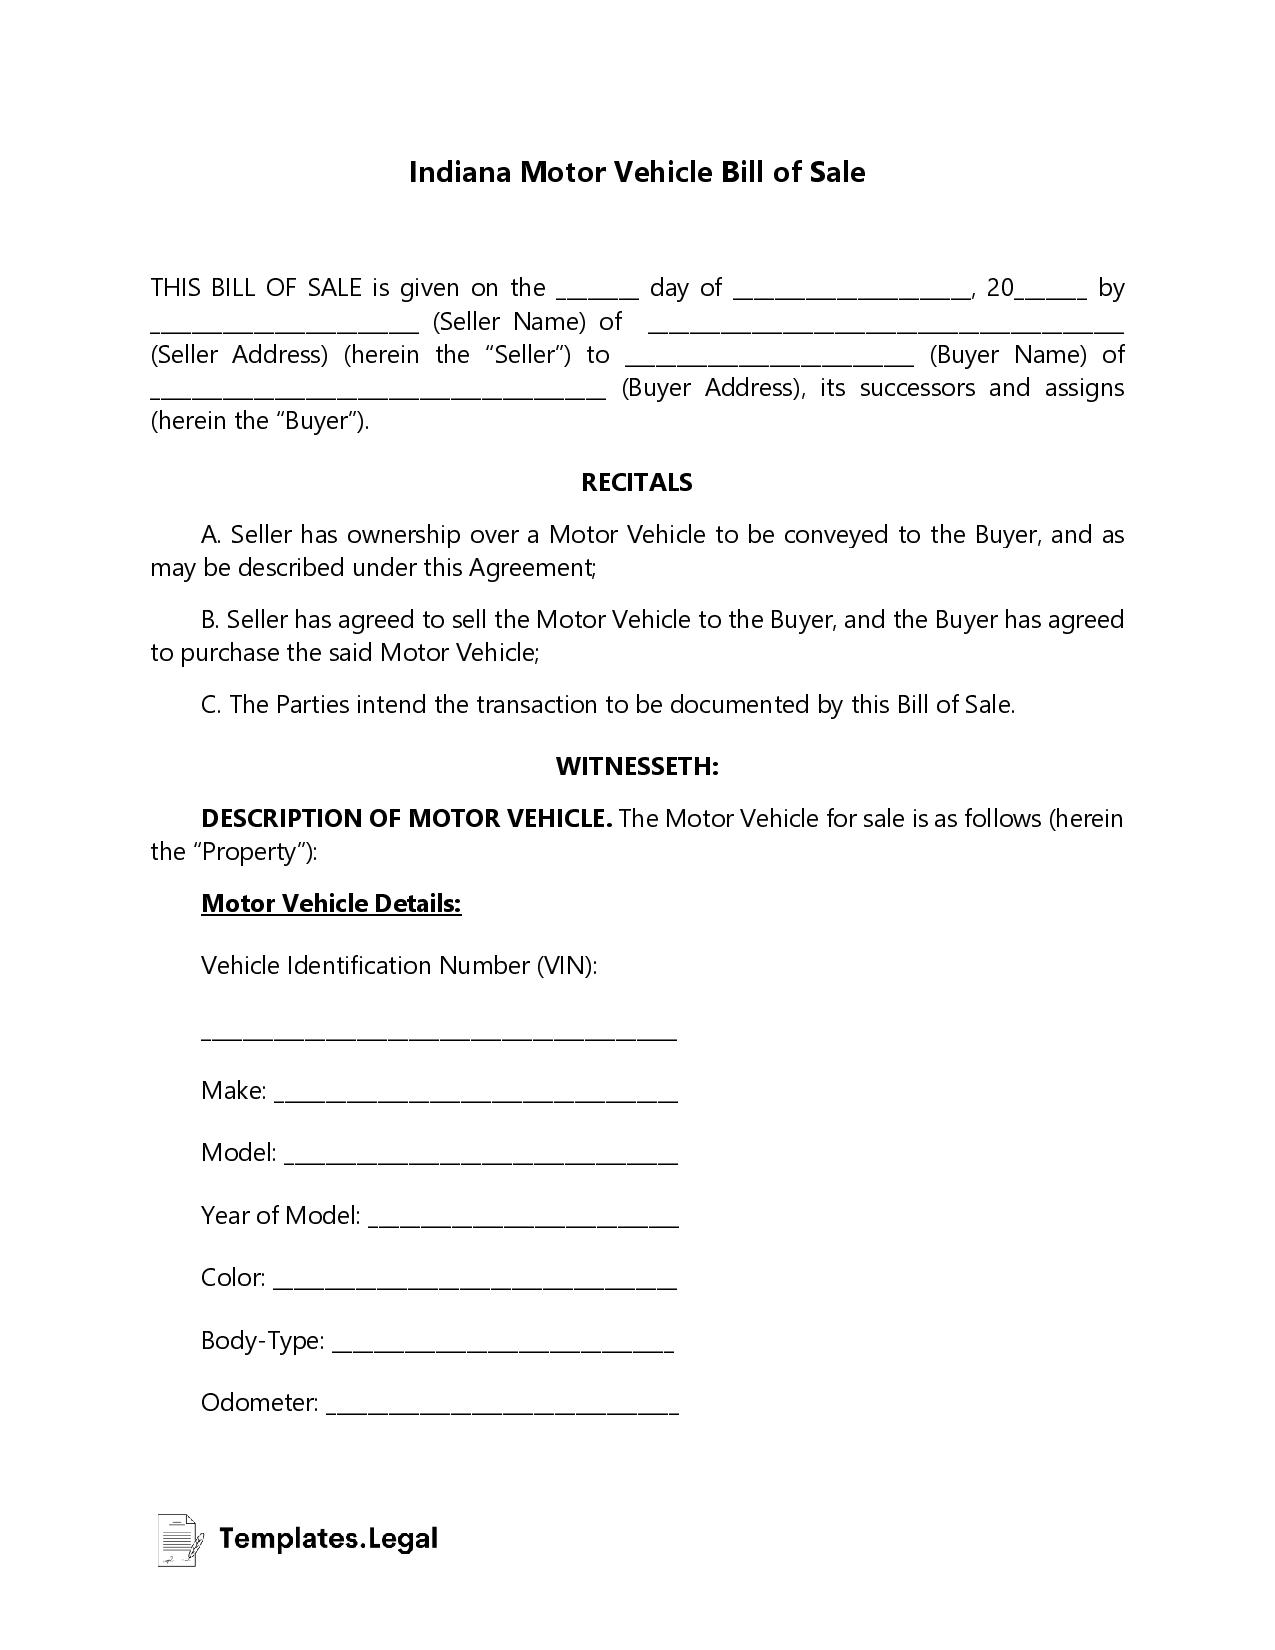 Indiana Motor Vehicle Bill of Sale - Templates.Legal